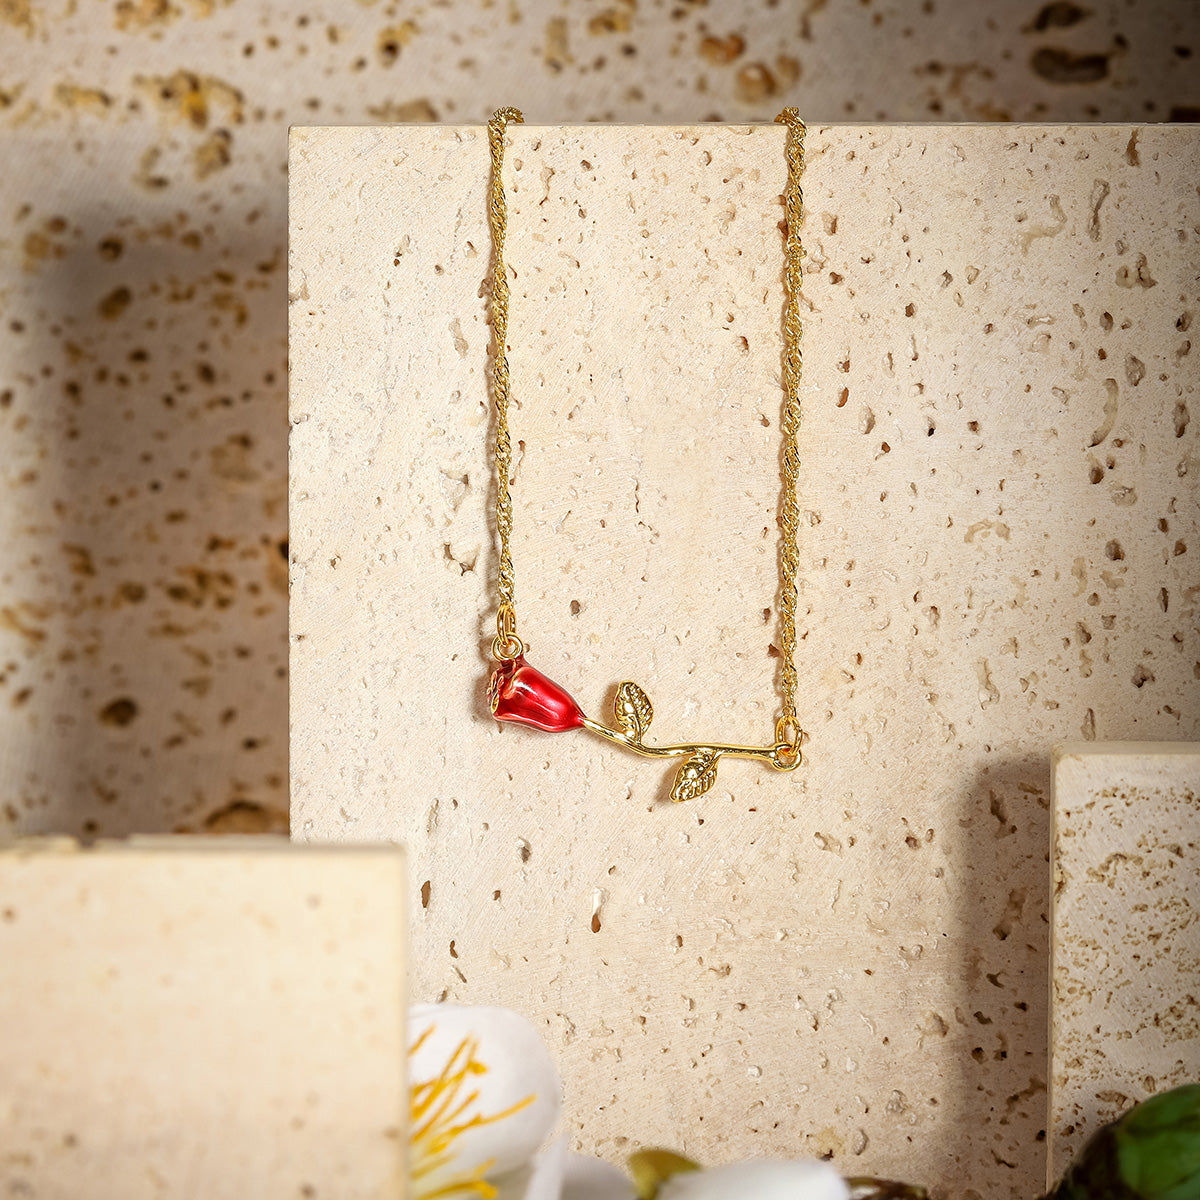 The Little Prince's Rose Necklace